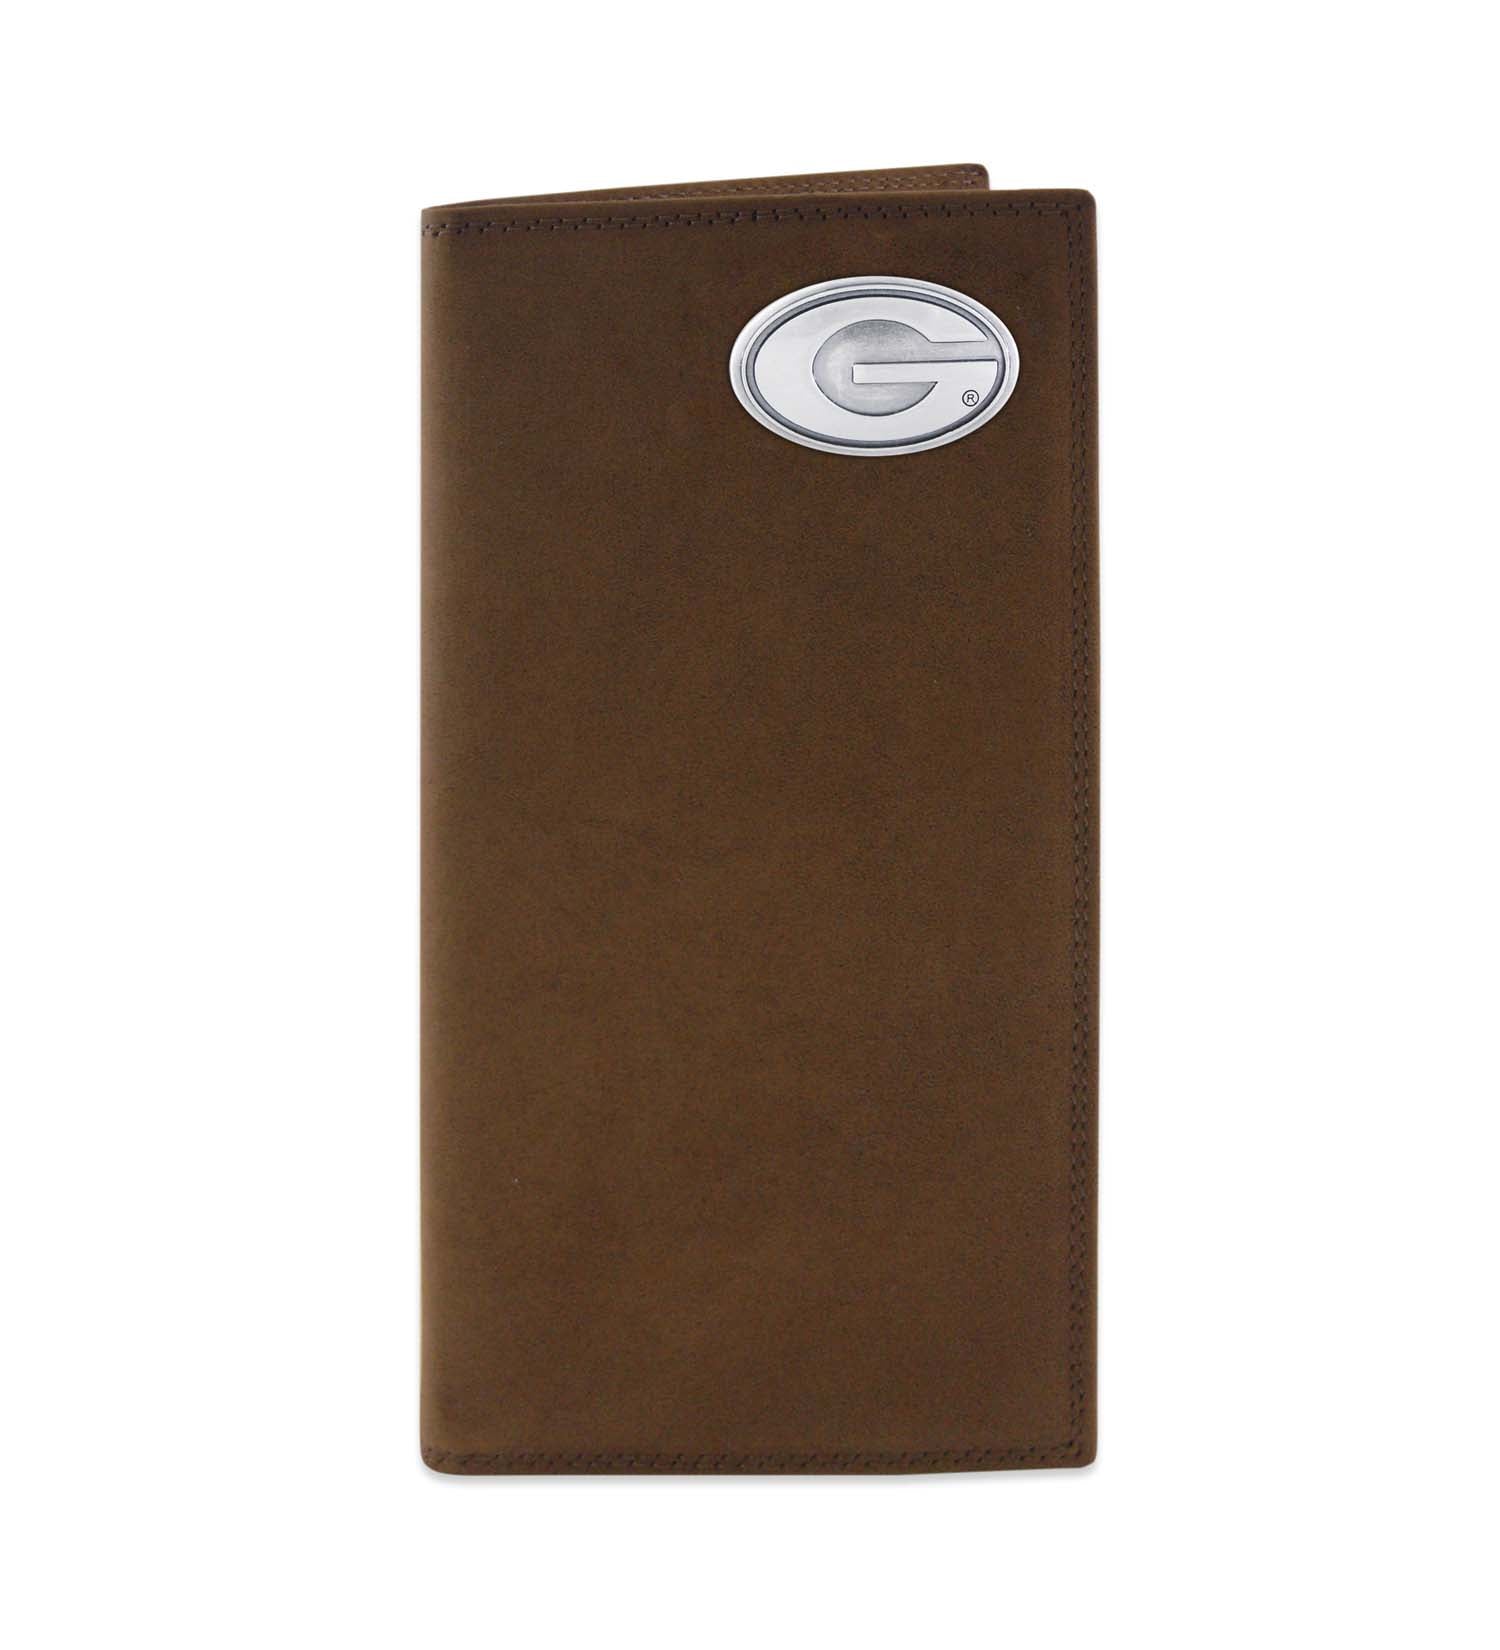 Ducks Unlimited Leather Checkbook Covers